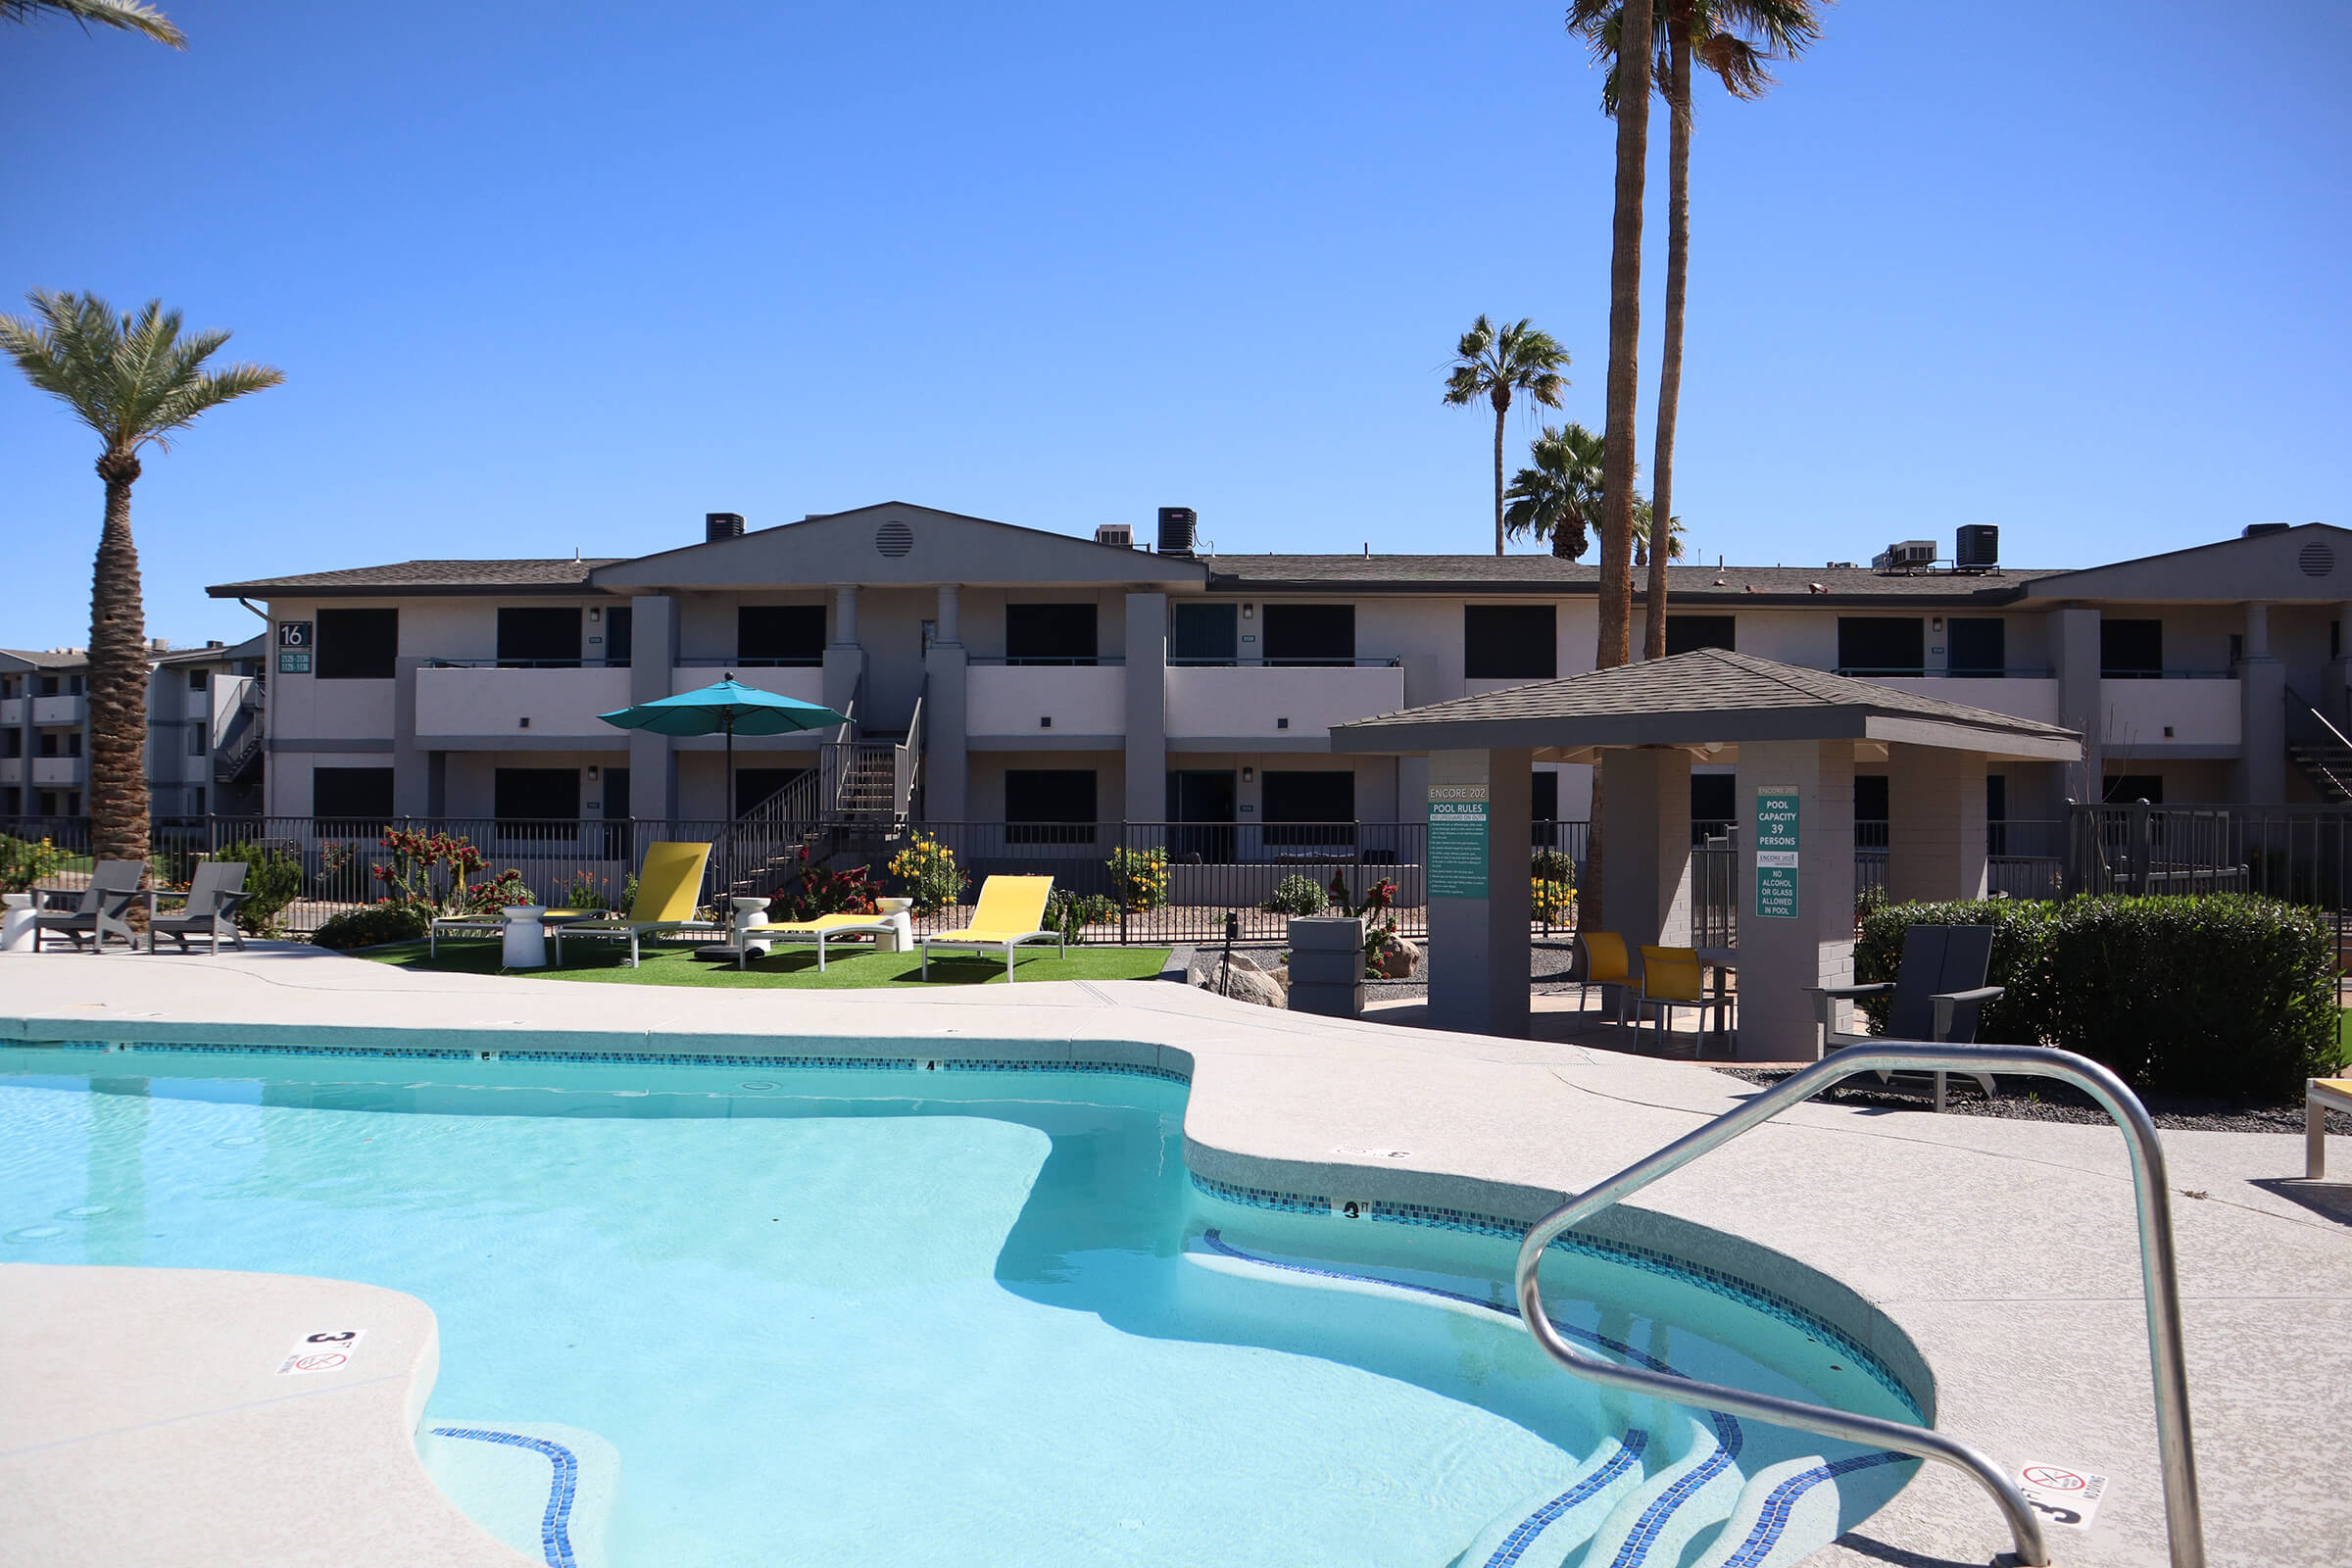 WELCOME TO THE RISE ENCORE APARTMENTS IN PHOENIX, ARIZONA!